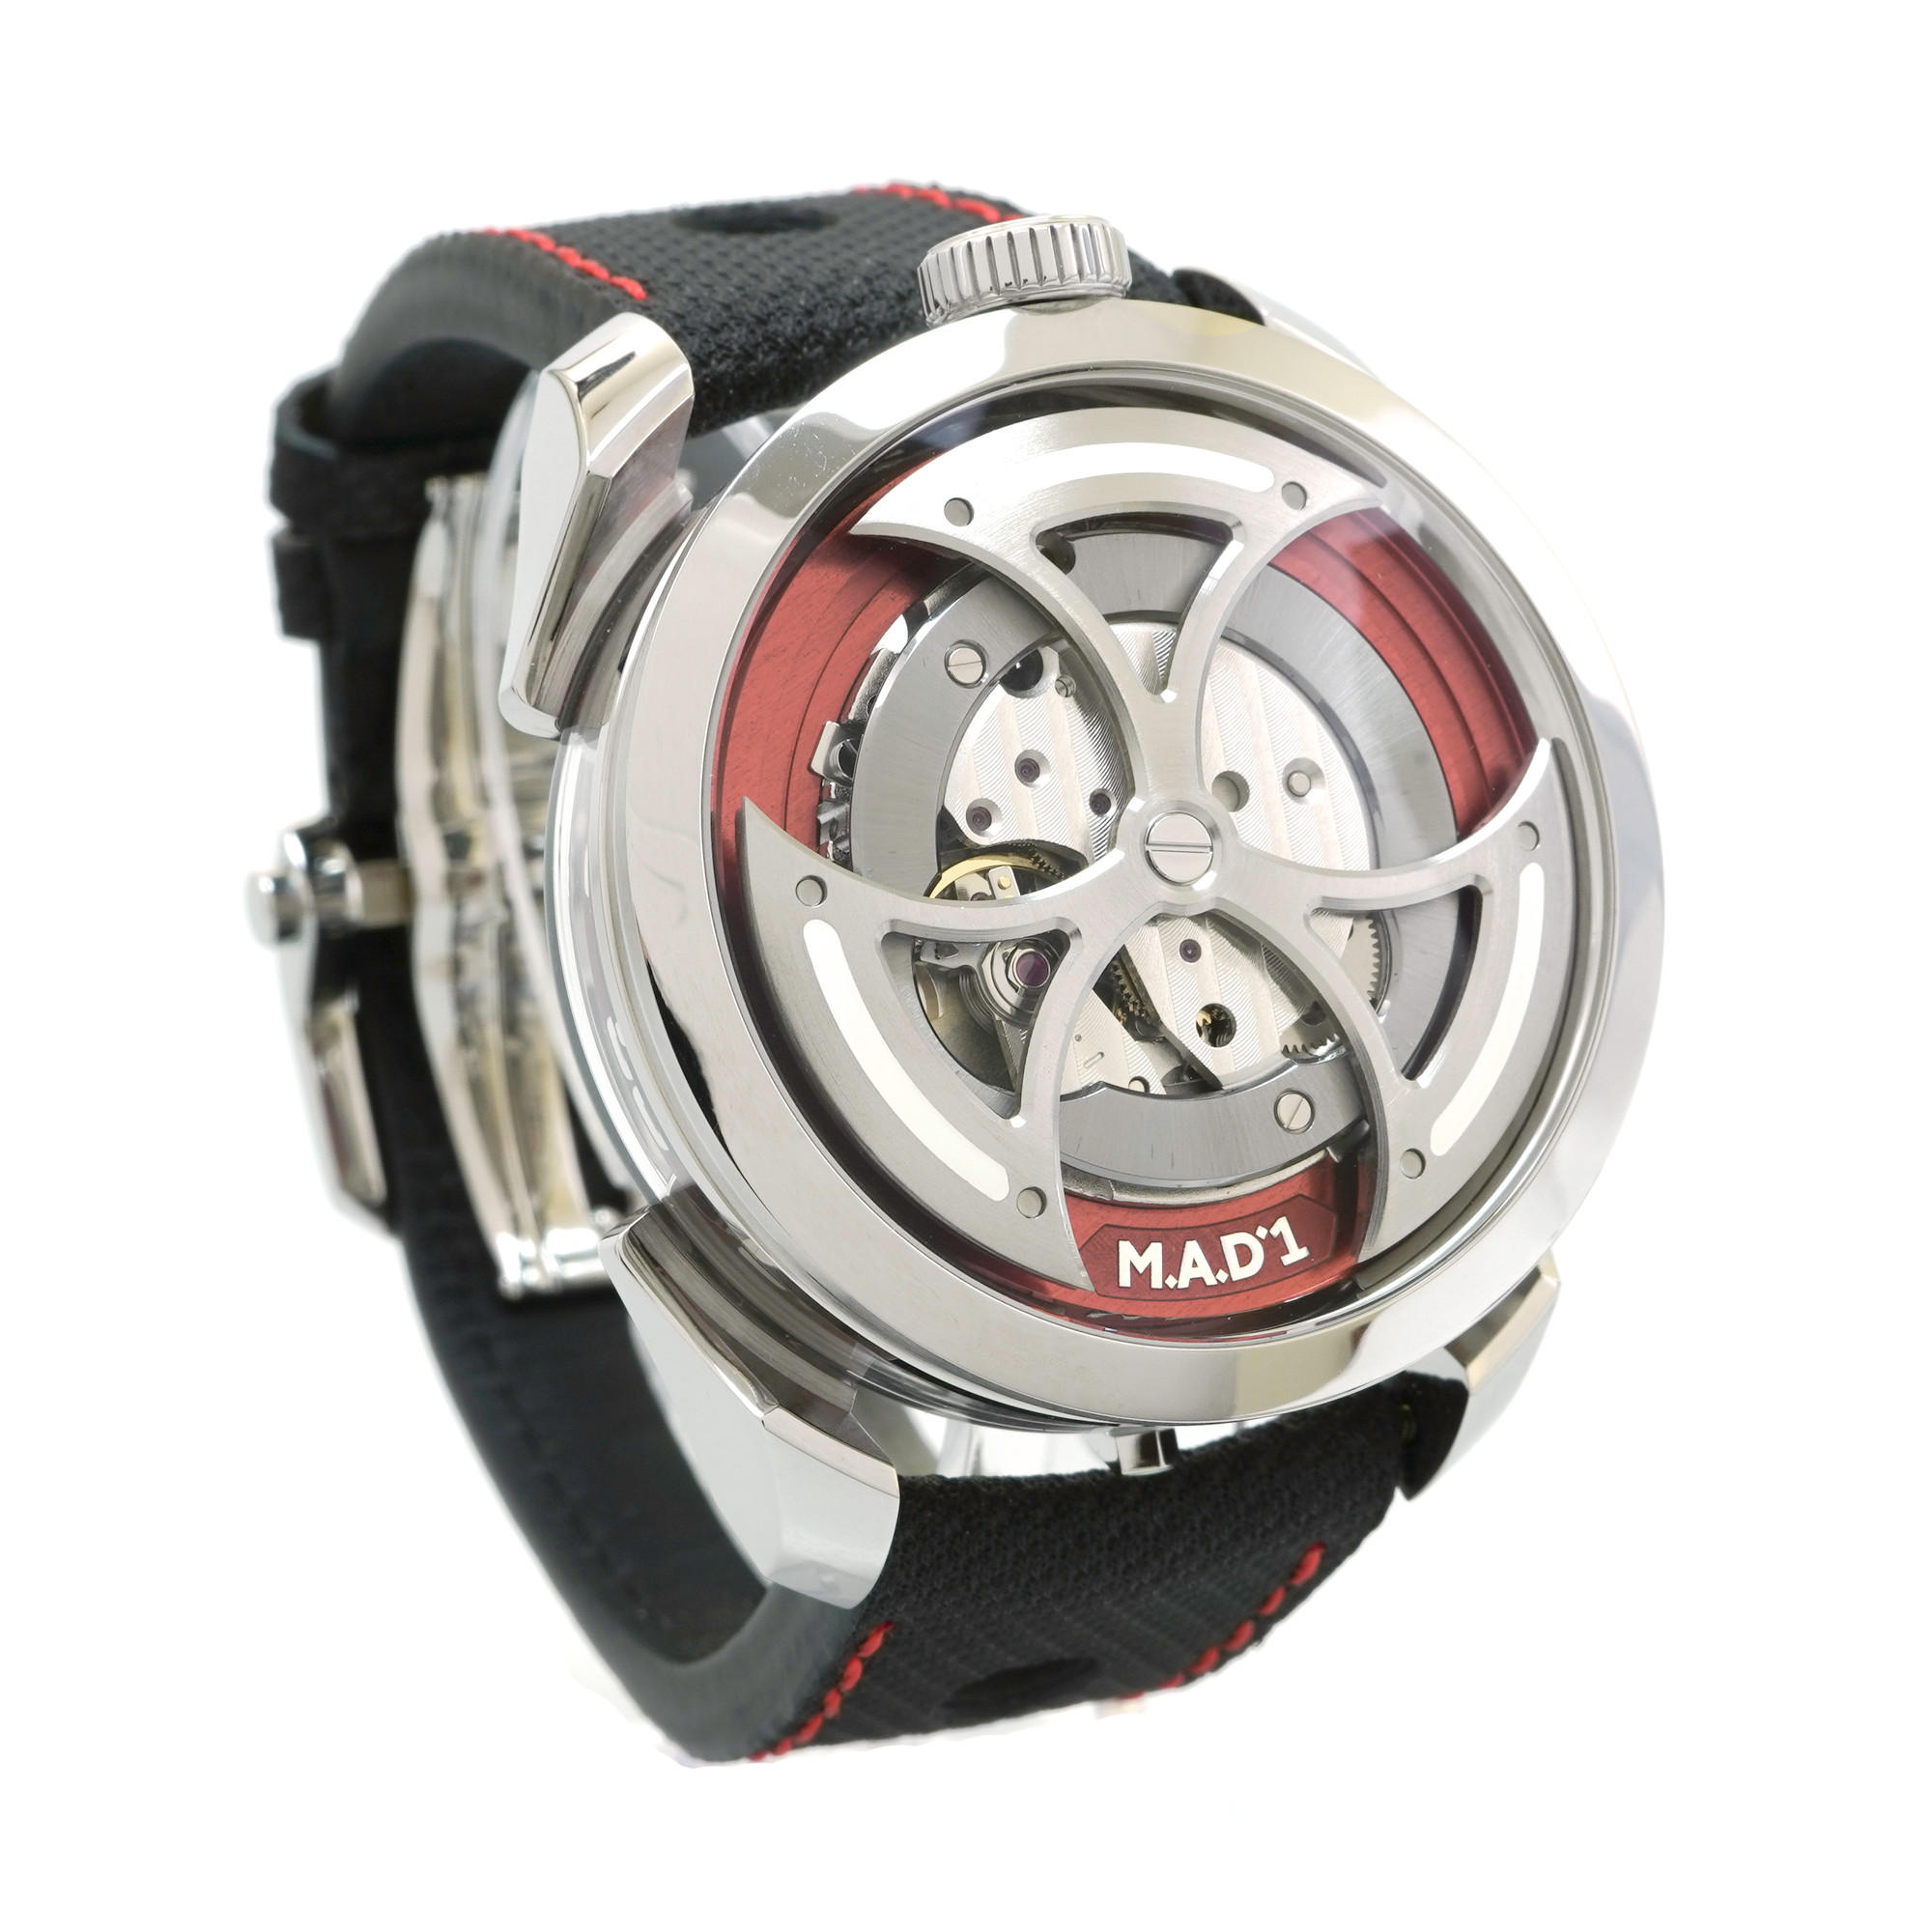 MB&F M.A.D.1 Red - Inventory 3565